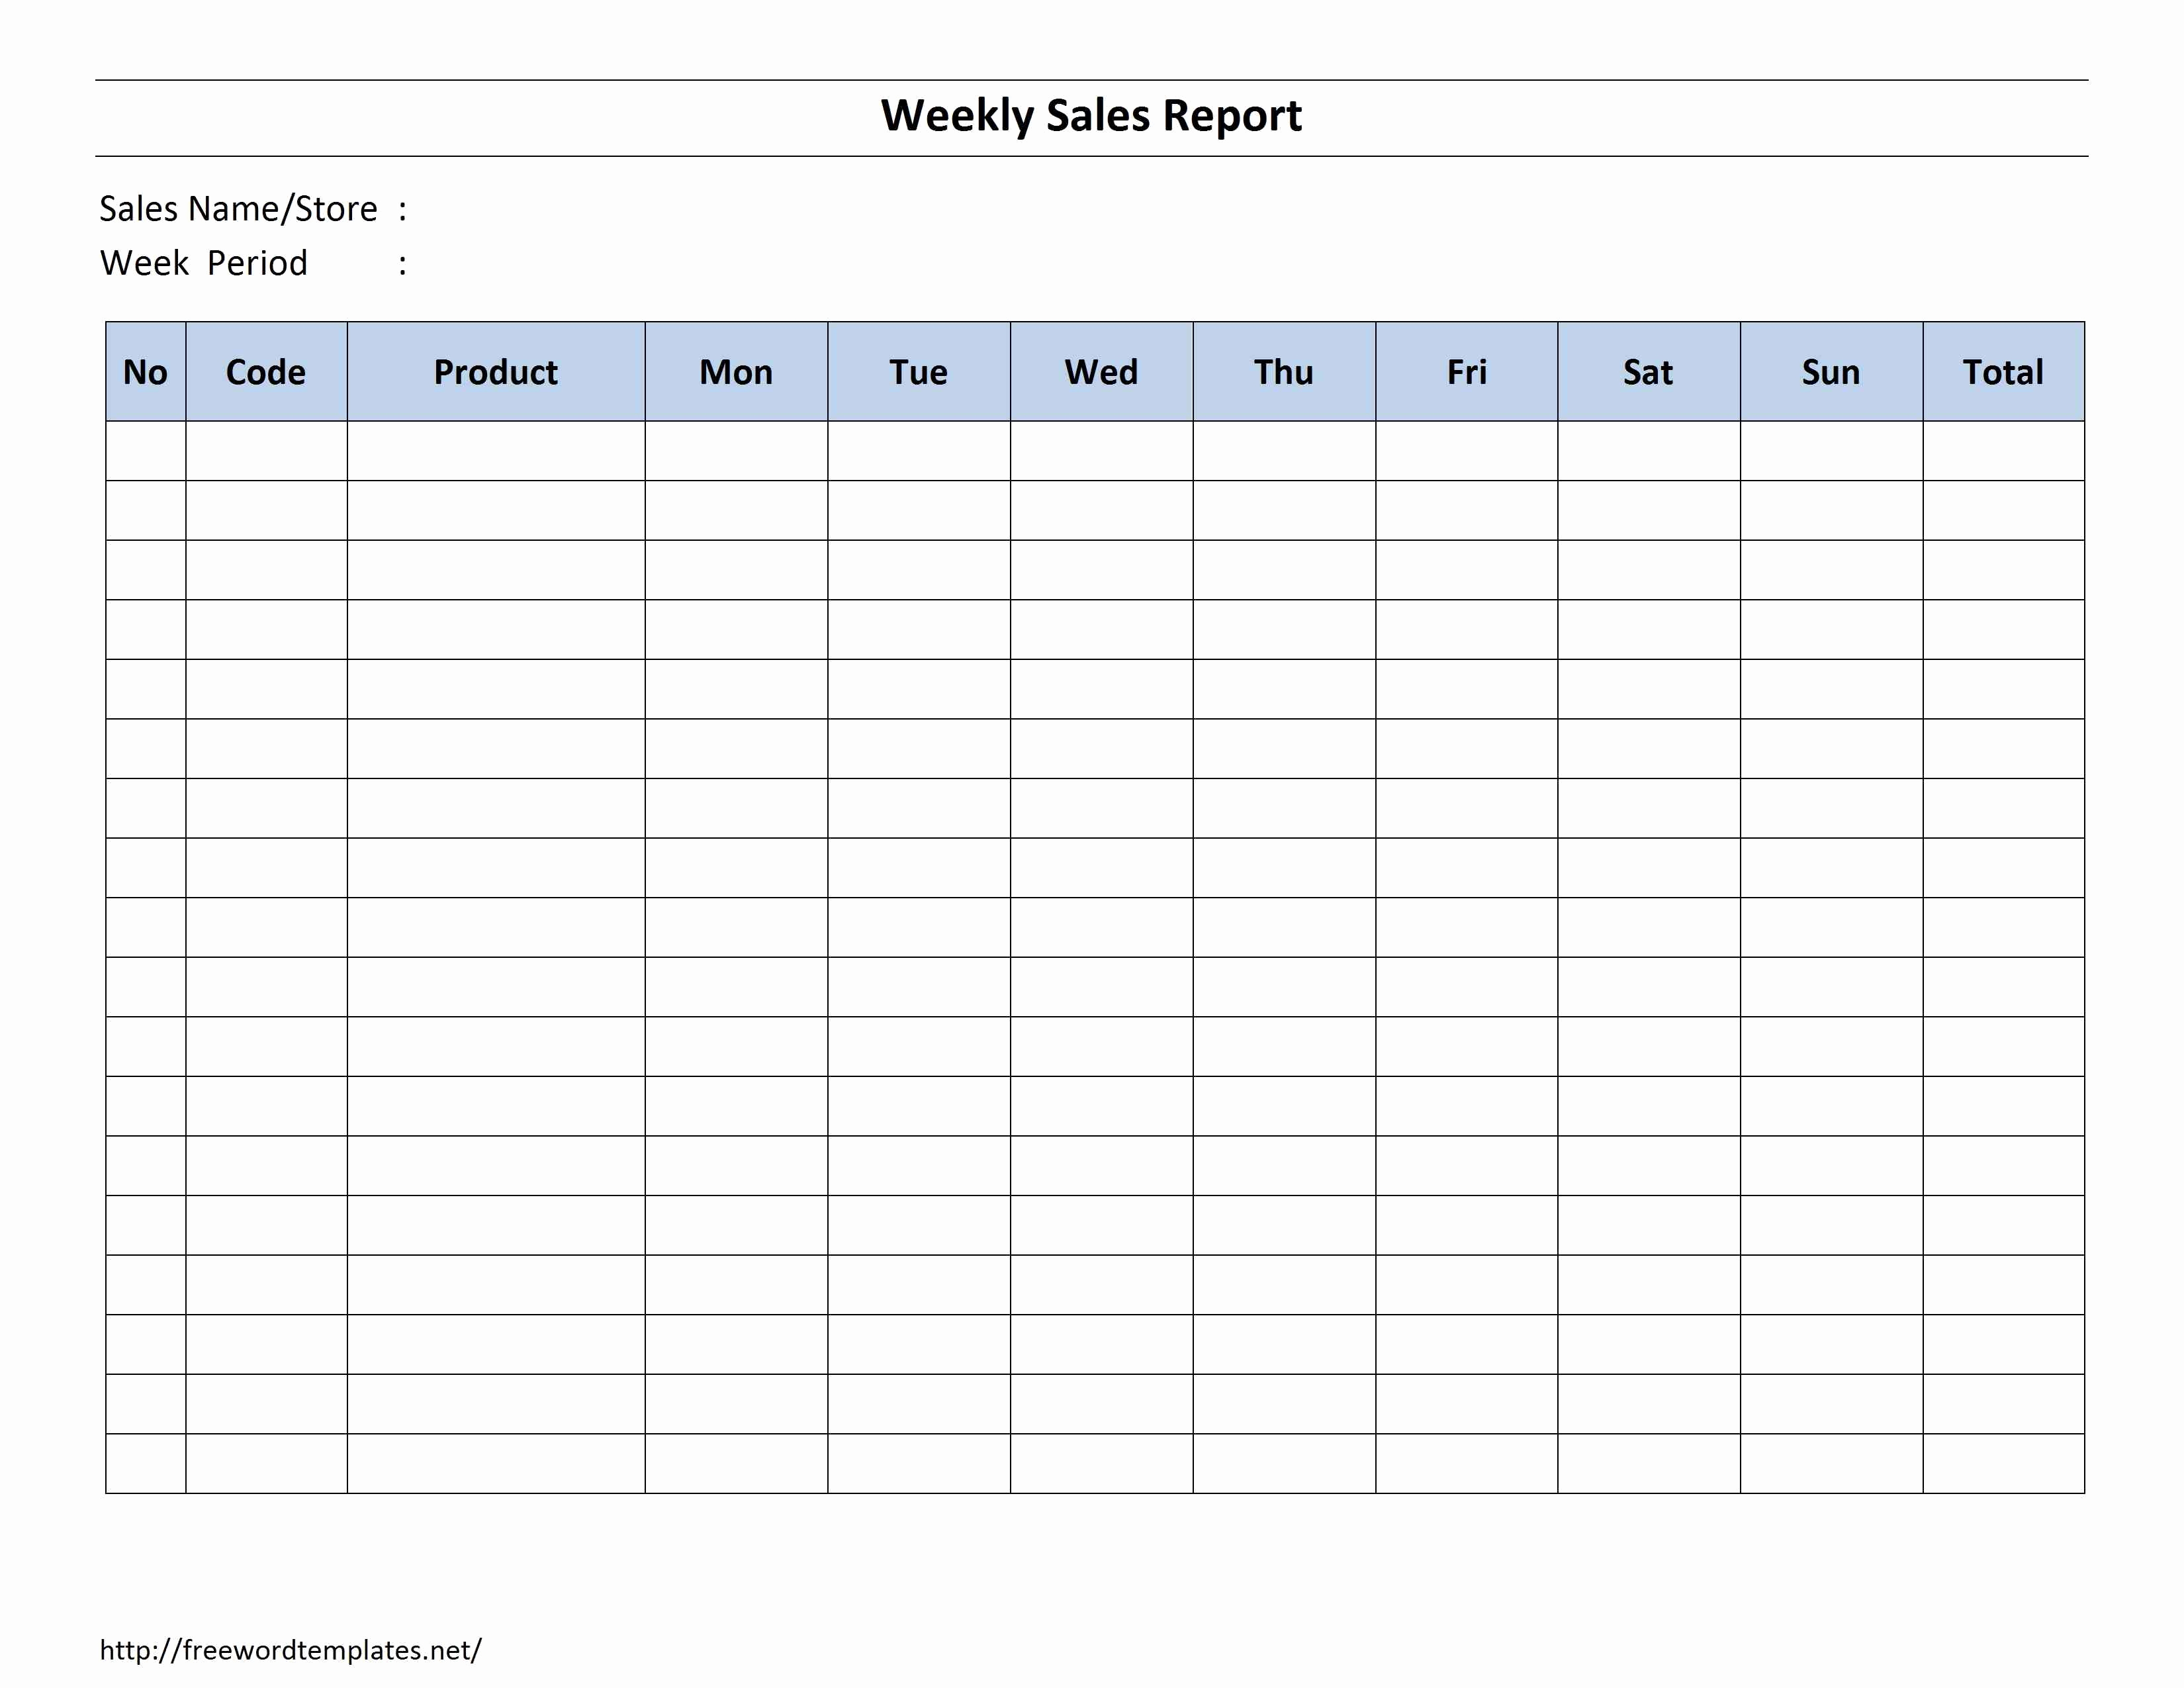 Letters Of Sales Activity Report Template Excel Inside Sales Activity Report Template Excel In Spreadsheet